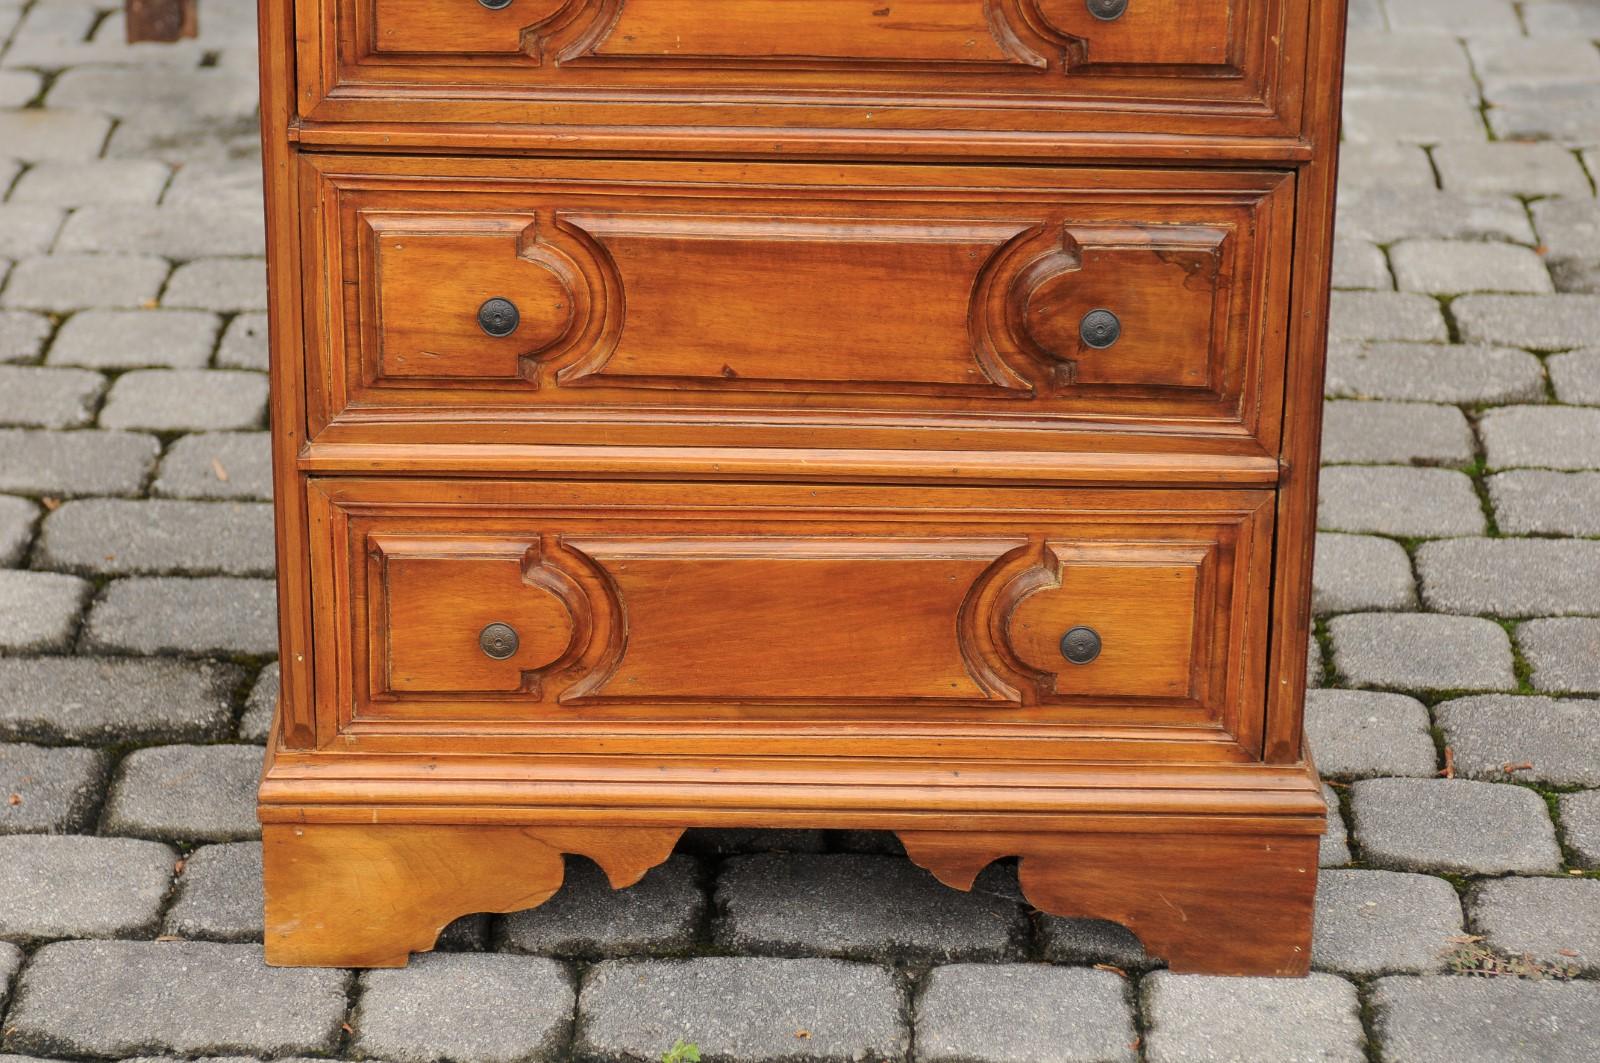 Carved Petite Italian Walnut Three-Drawer Commode circa 1870 with Molded Cartouches